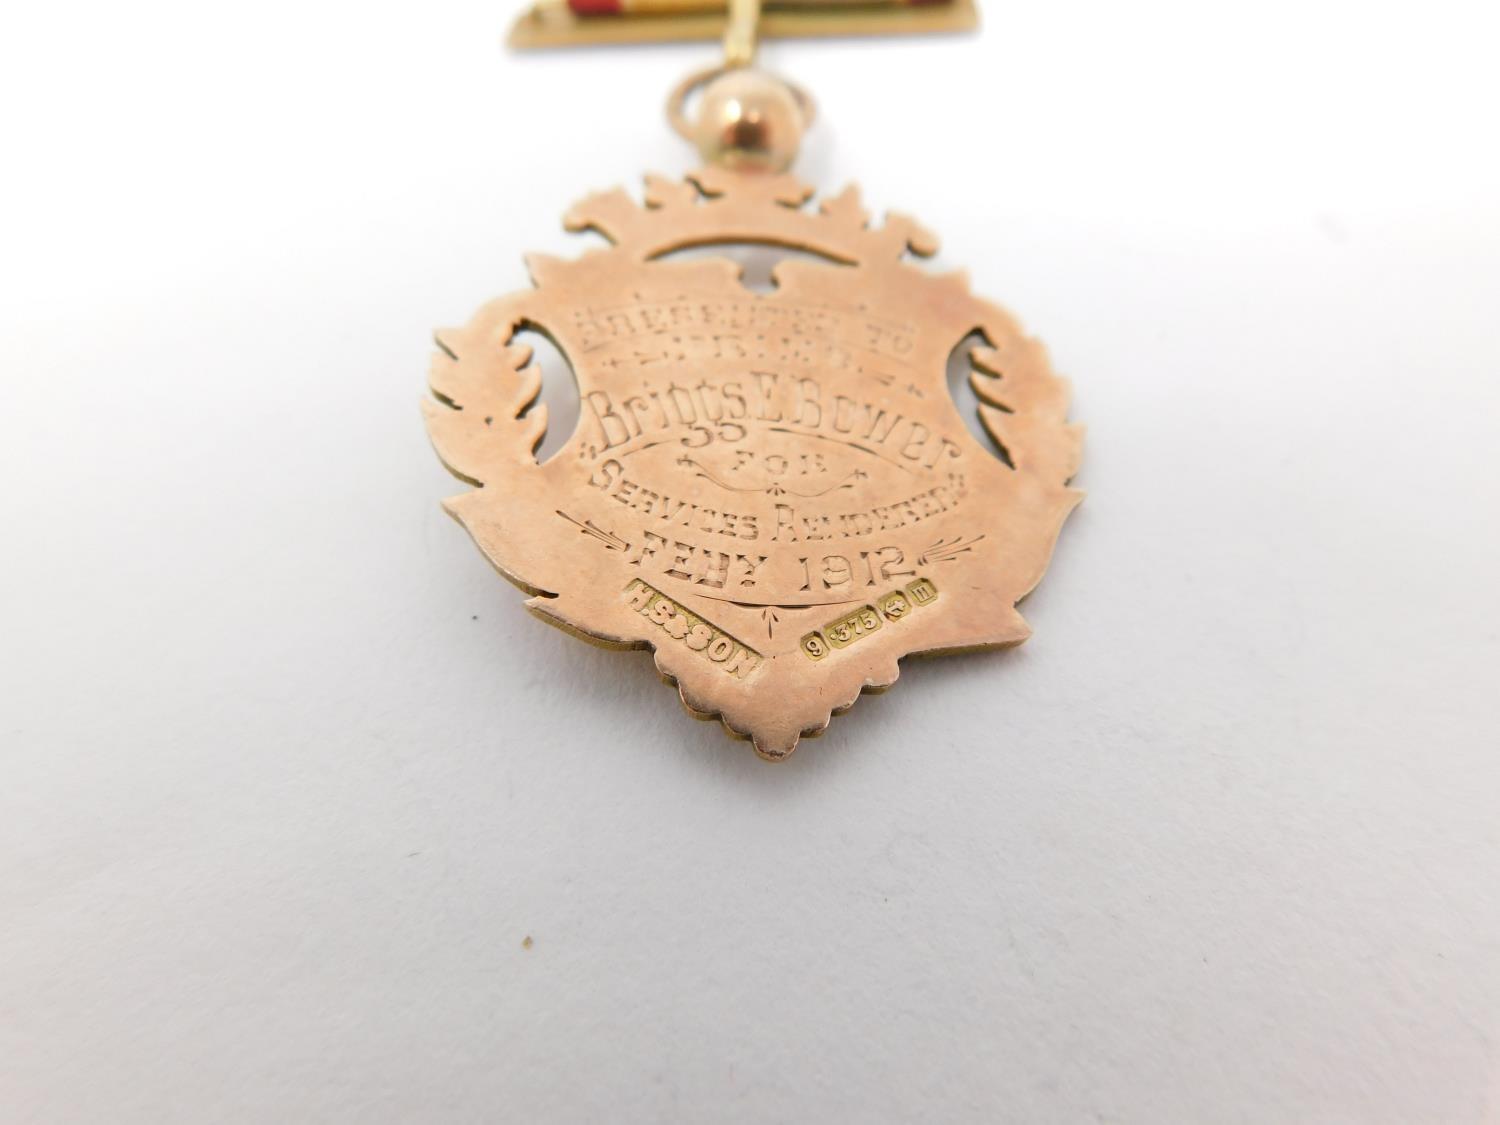 A 9 ct rose gold and enamel engraved Masonic lodge 1423 medal on an embroidered silk ribbon. - Image 7 of 8